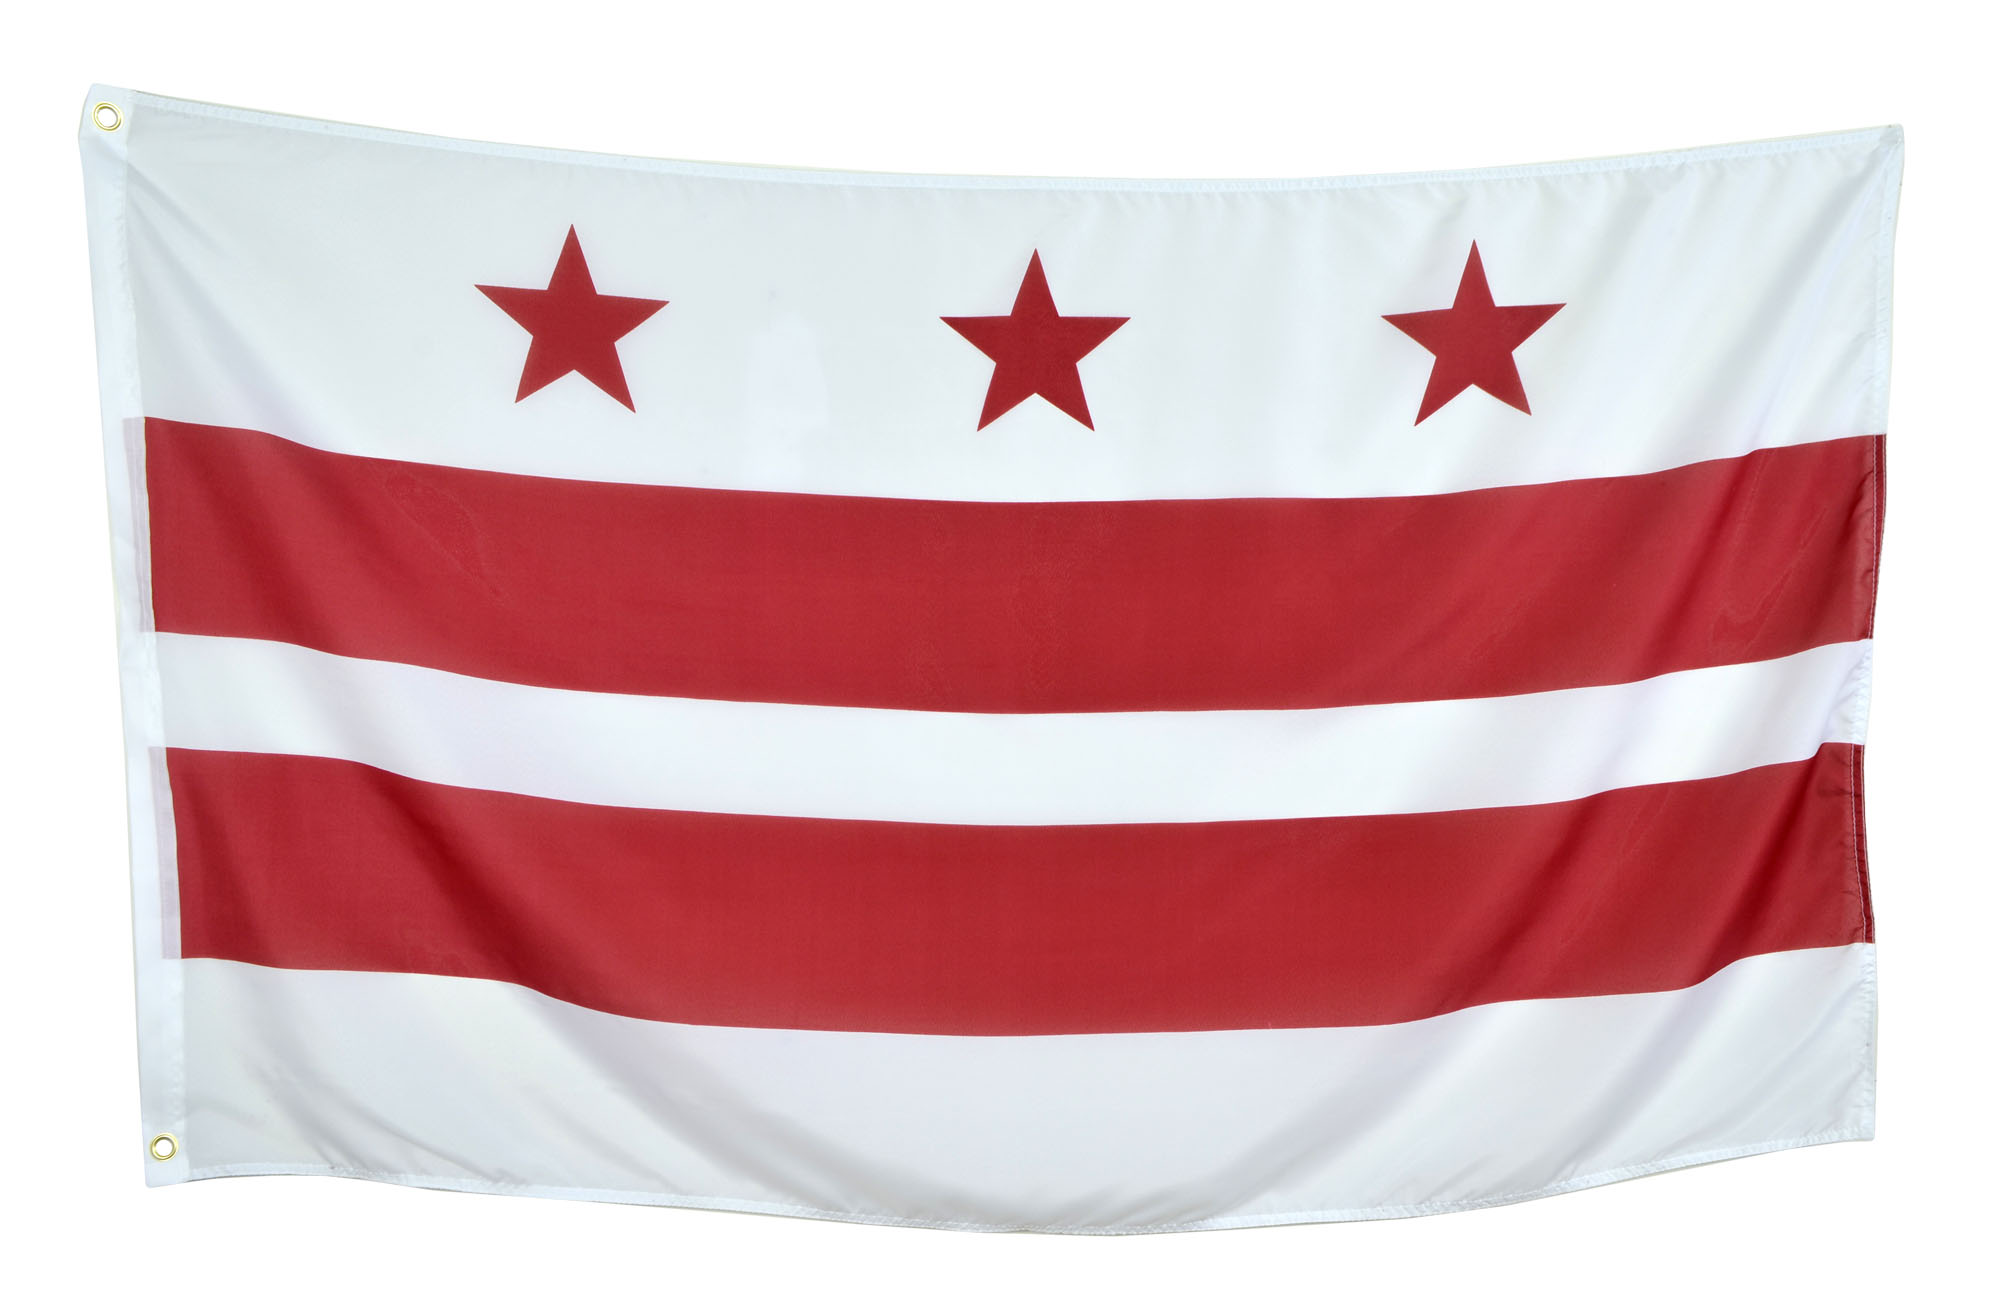 Shop72 - High Quality US State Flags - 100D 3x5 Polyester Flags - Washington One Size